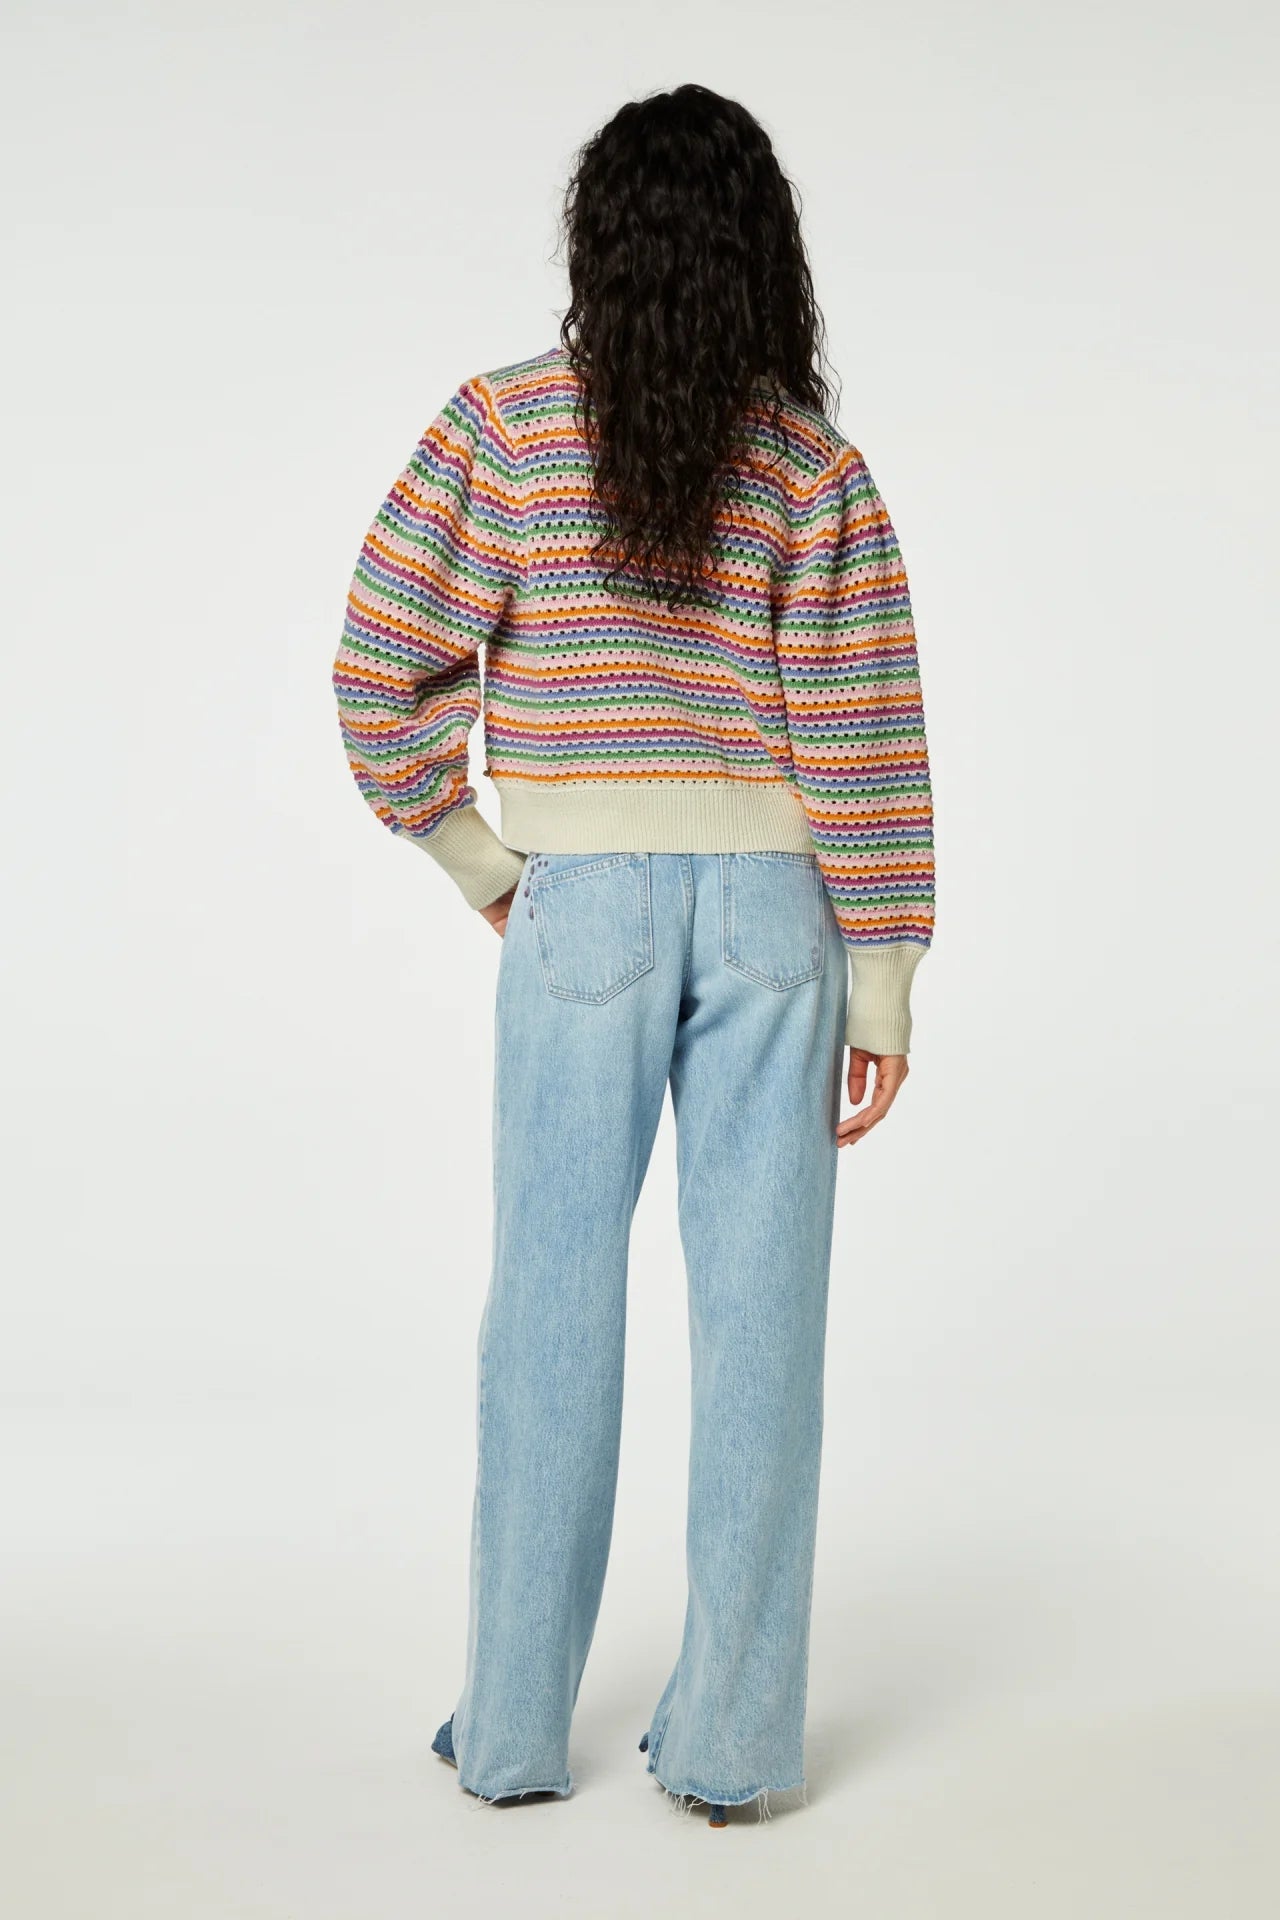 Woman from behind wearing a colorful striped Fabienne Chapot Heather Cardigan with balloon sleeves and blue jeans against a plain background.